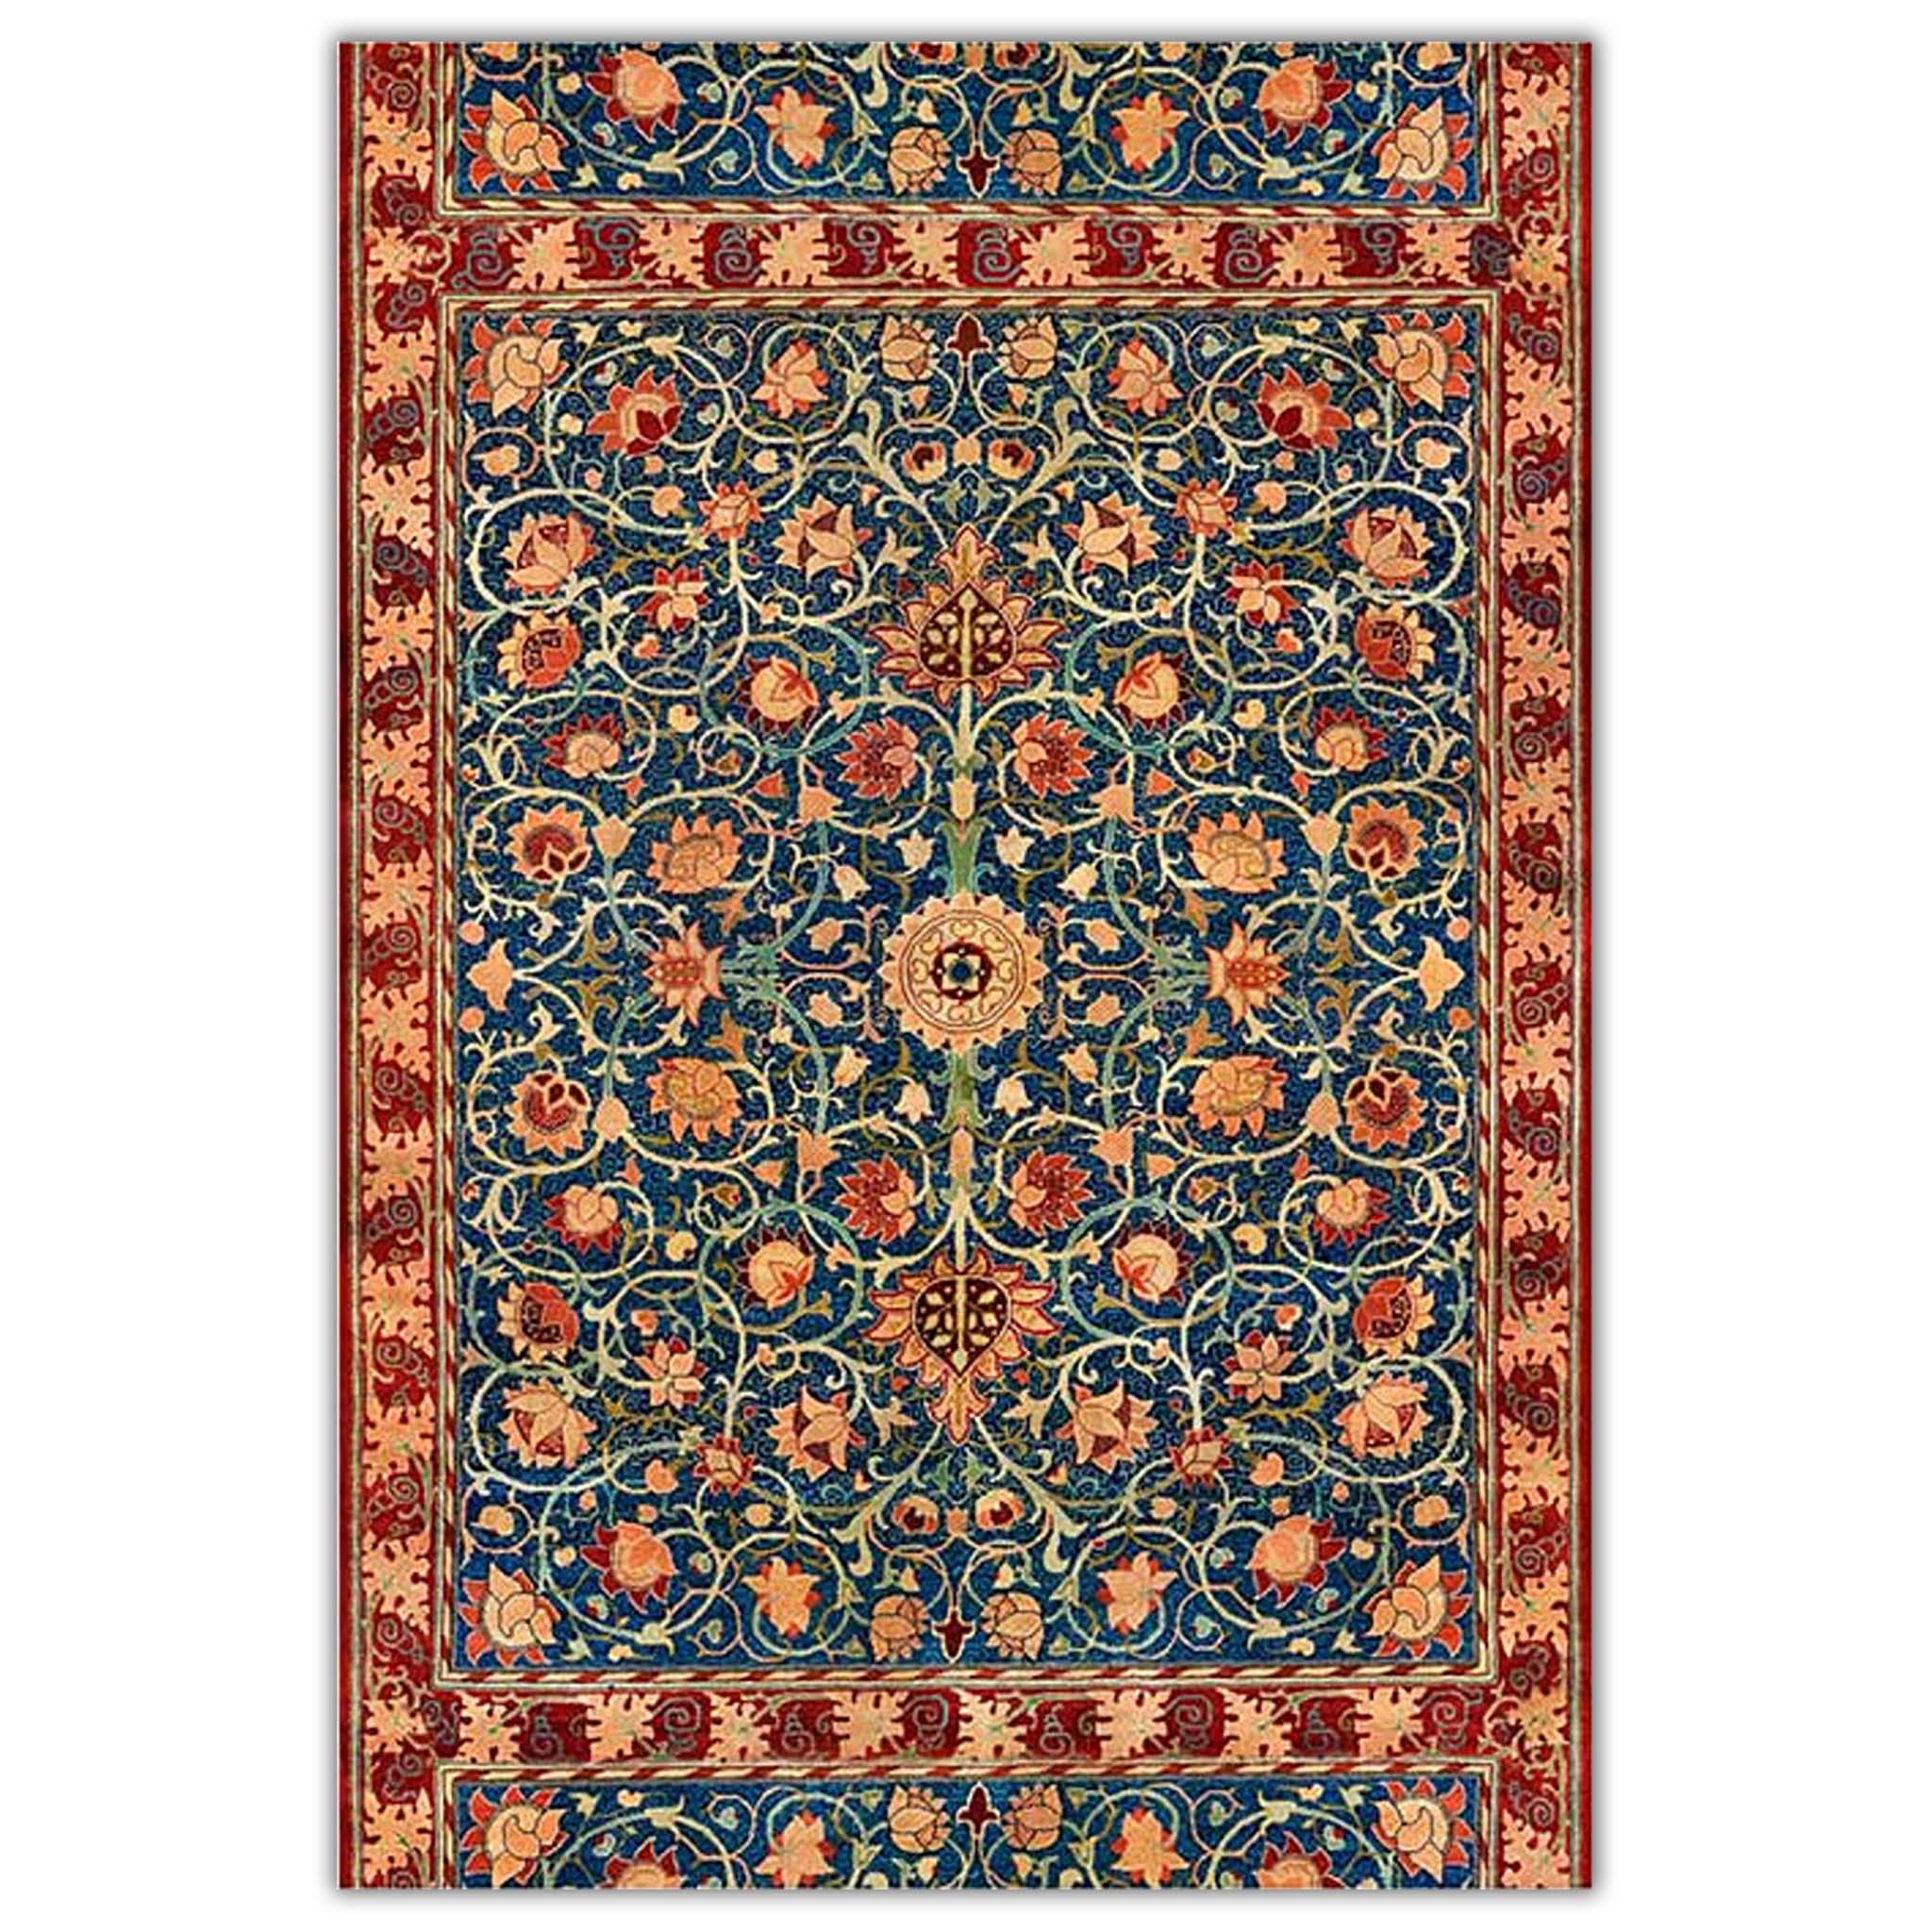 A1 rice paper design of a vintage carpet of reds and blues and features a repeating floral pattern. White borders on the sides.